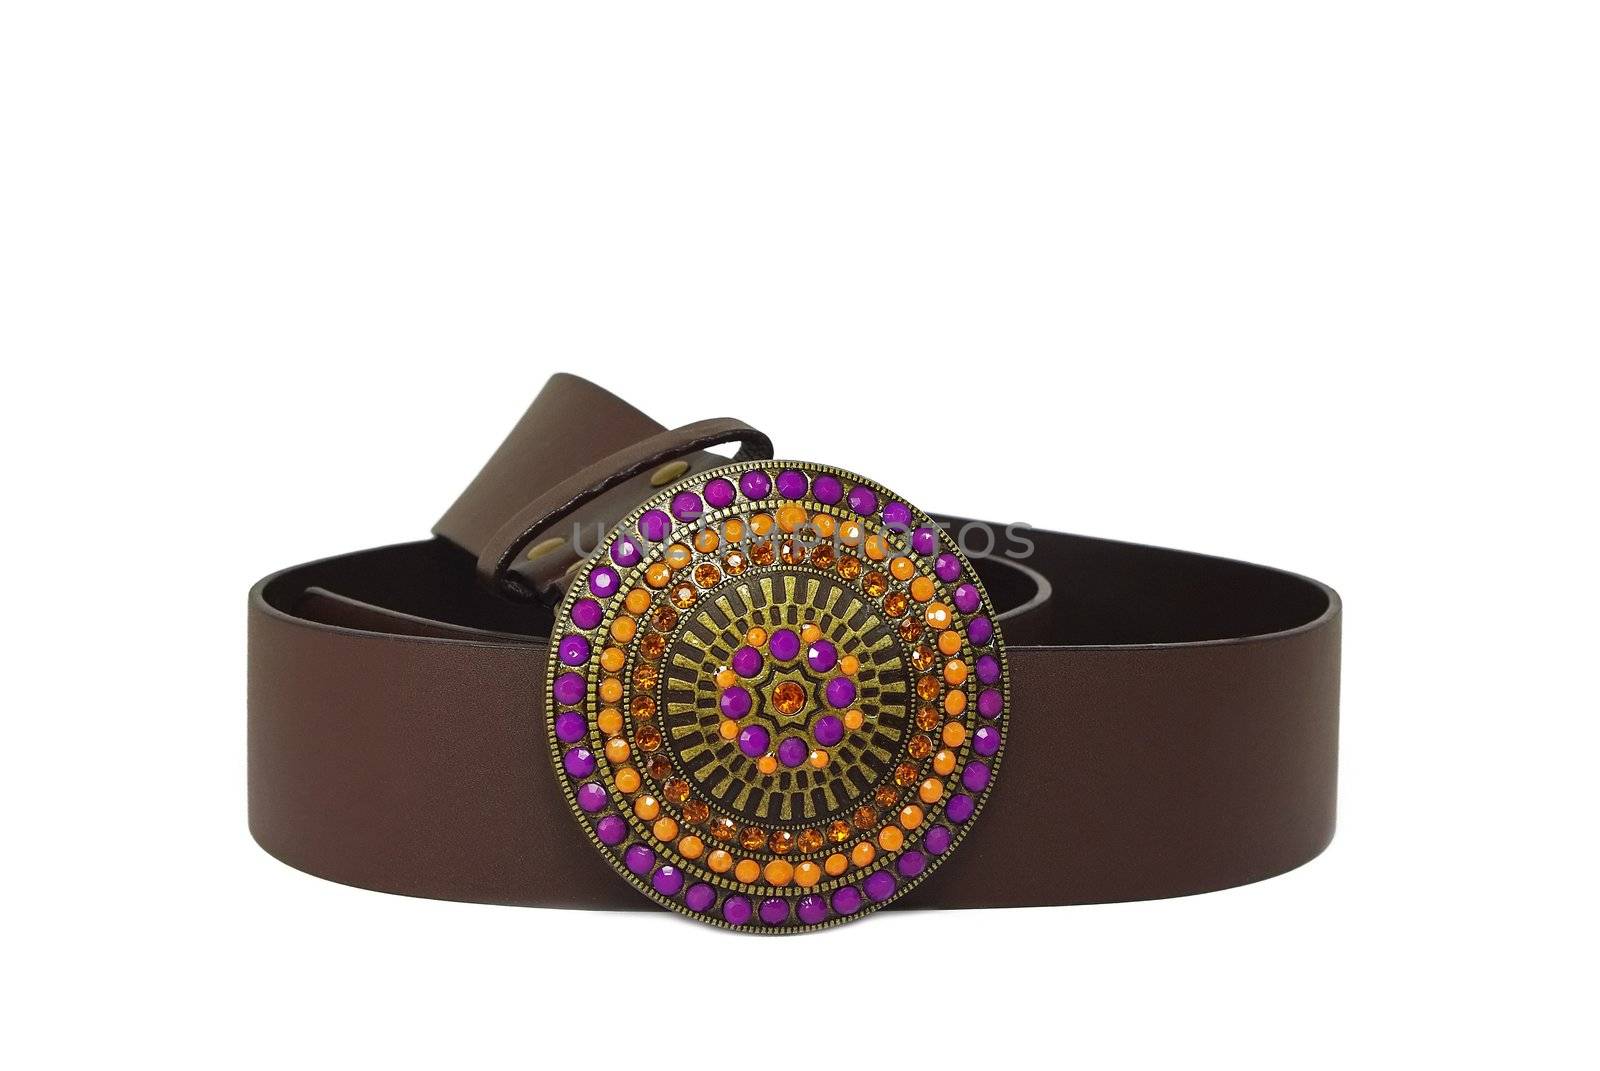 Leather belt with color decorated buckle